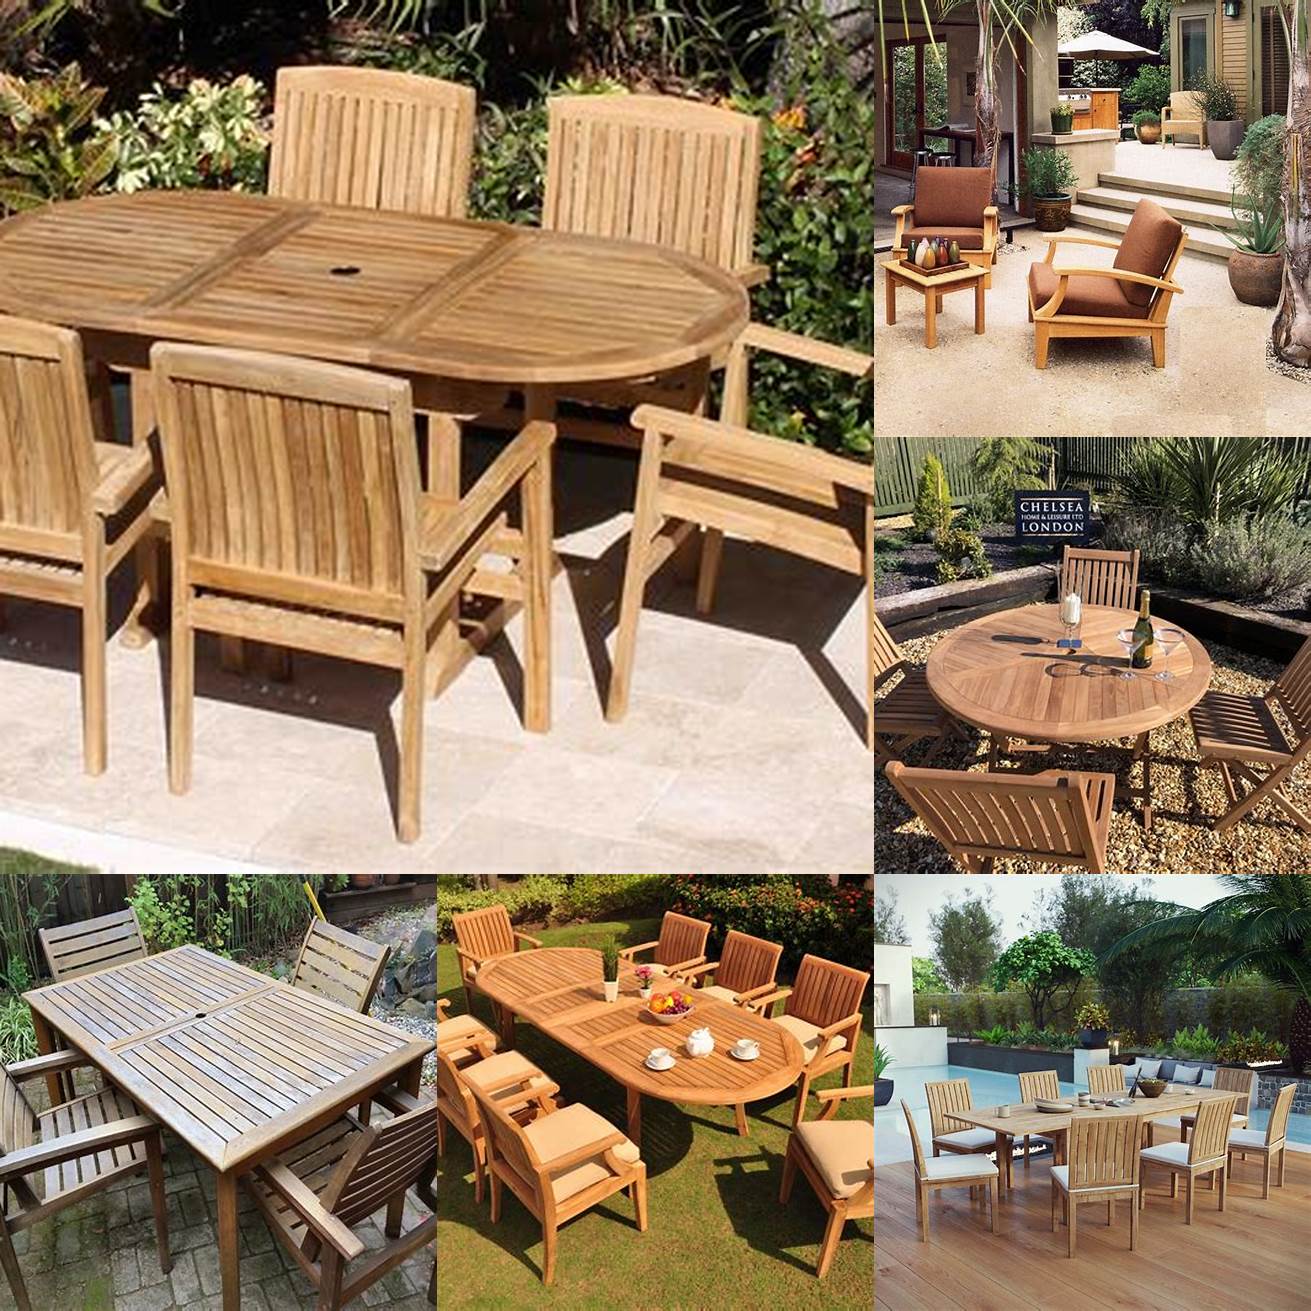 Teak Wood Furniture in Different Environments